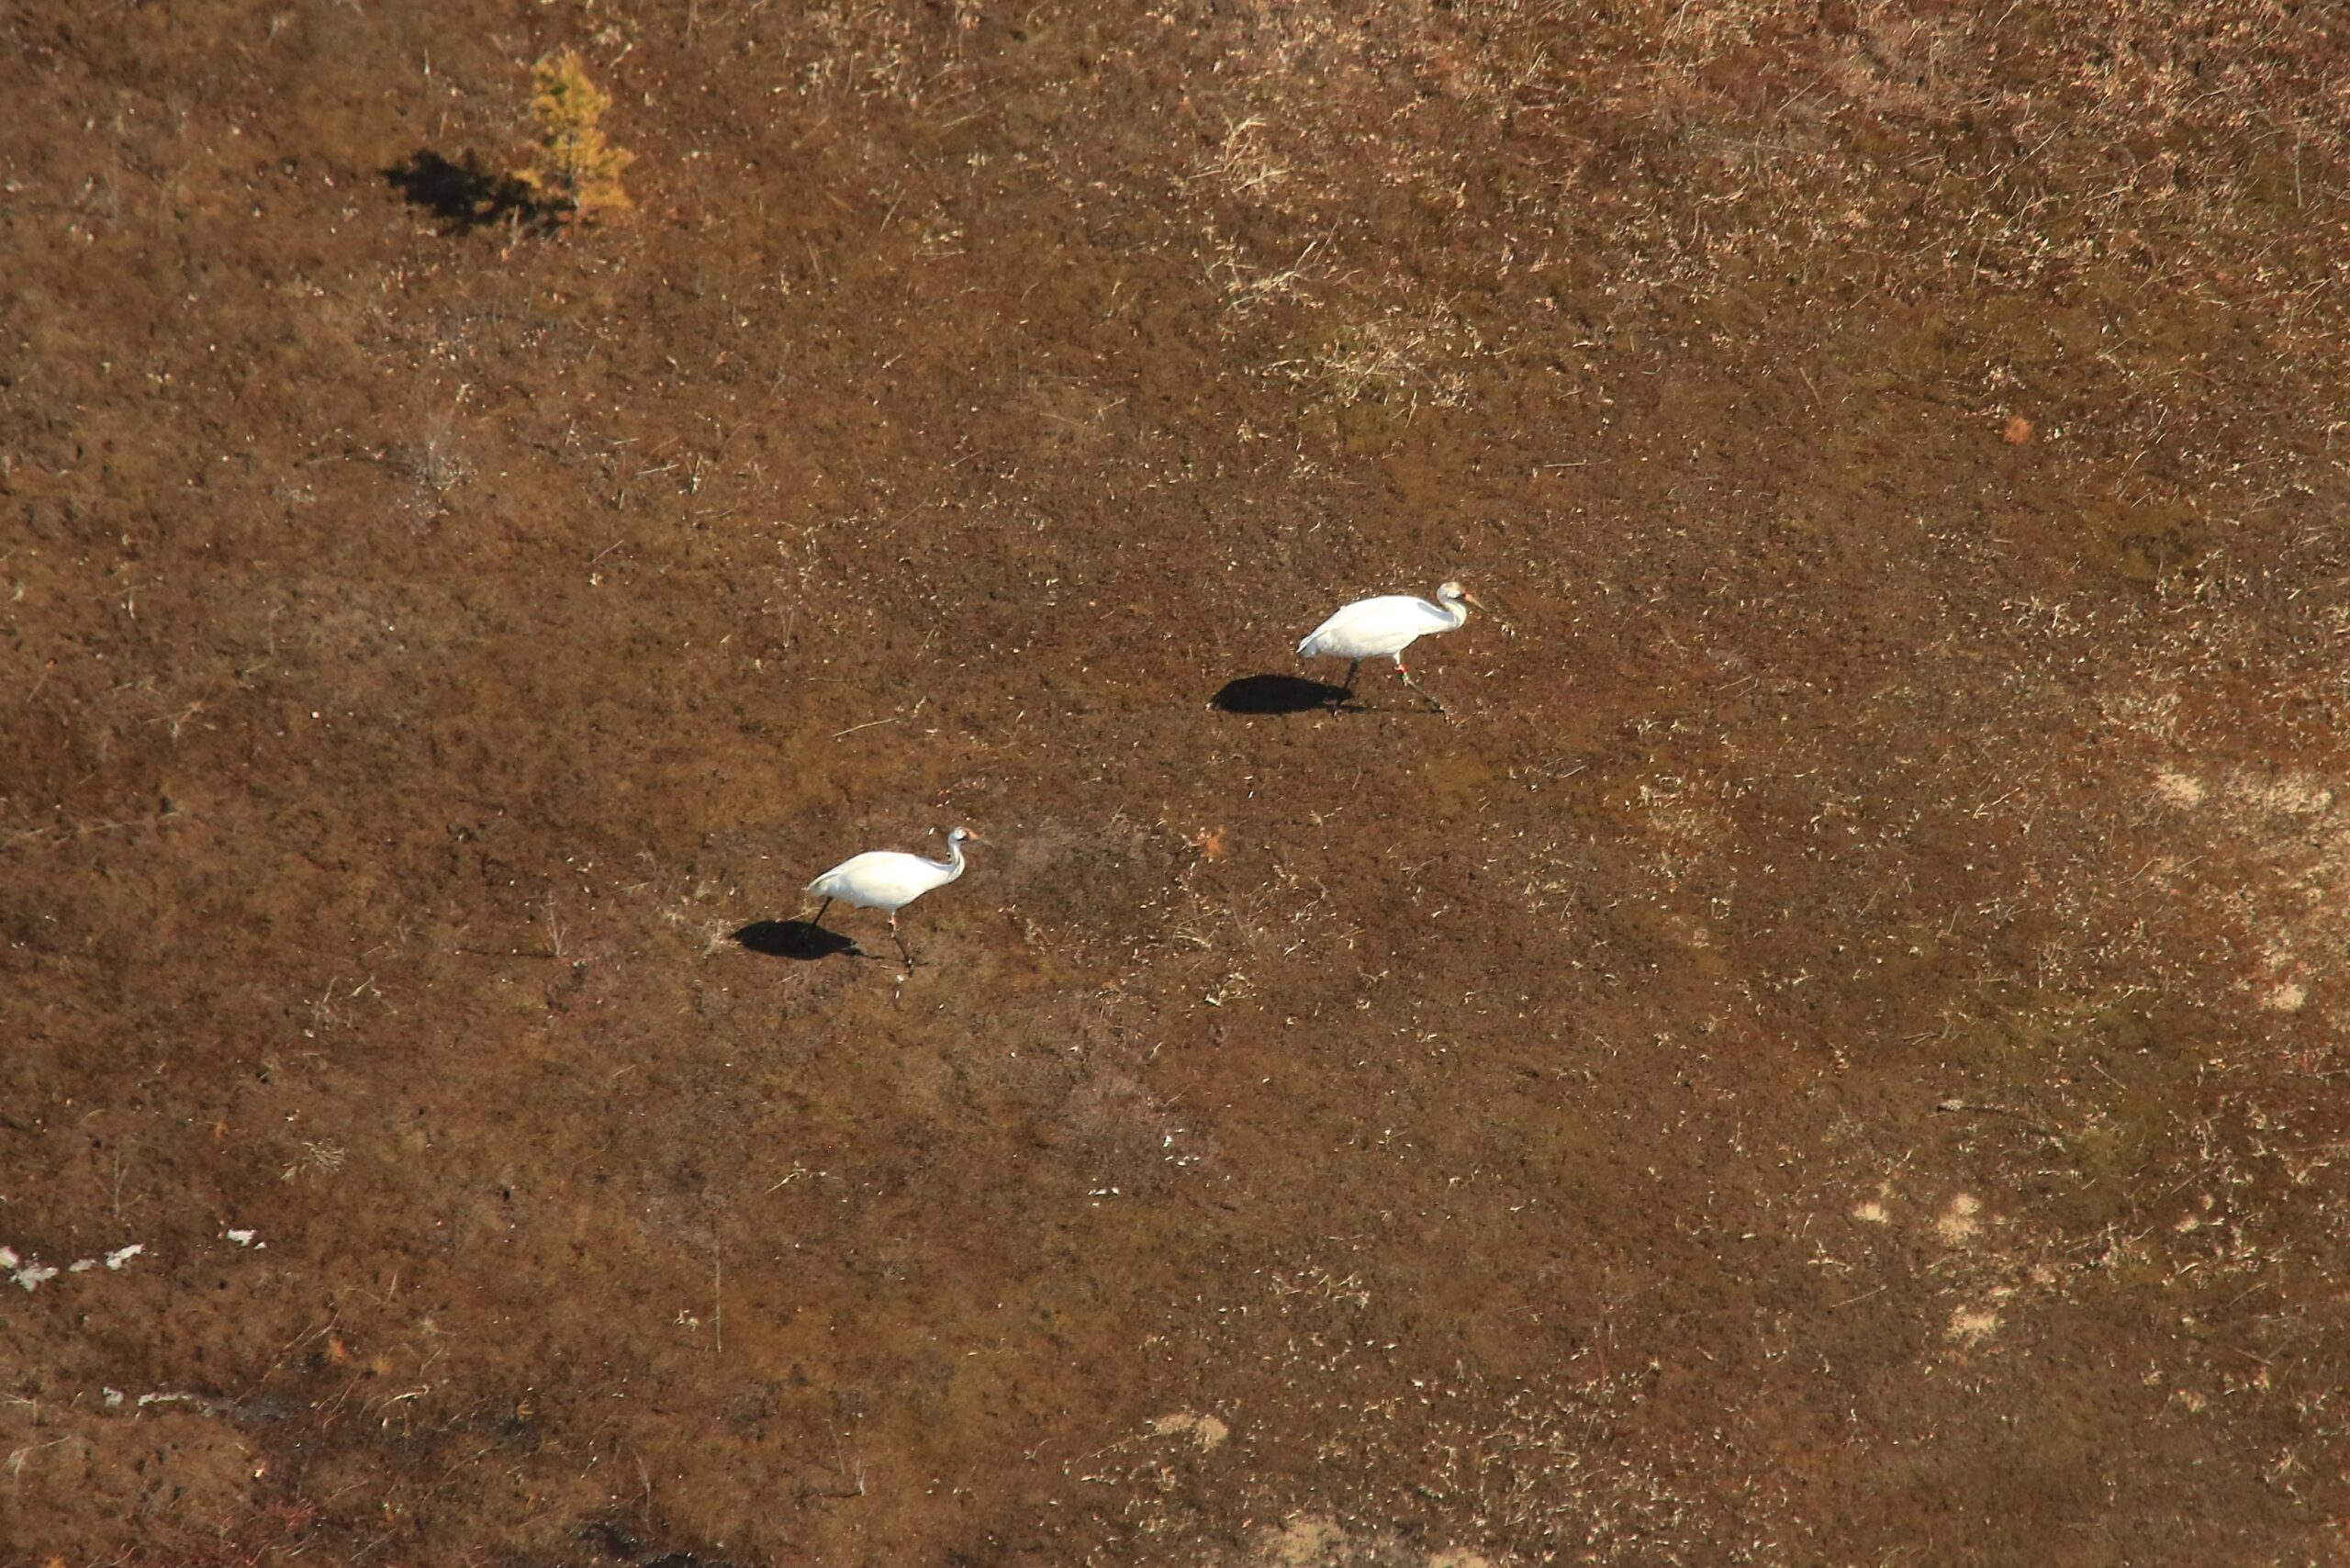 Aerial view of two Whooping Cranes in a marsh.